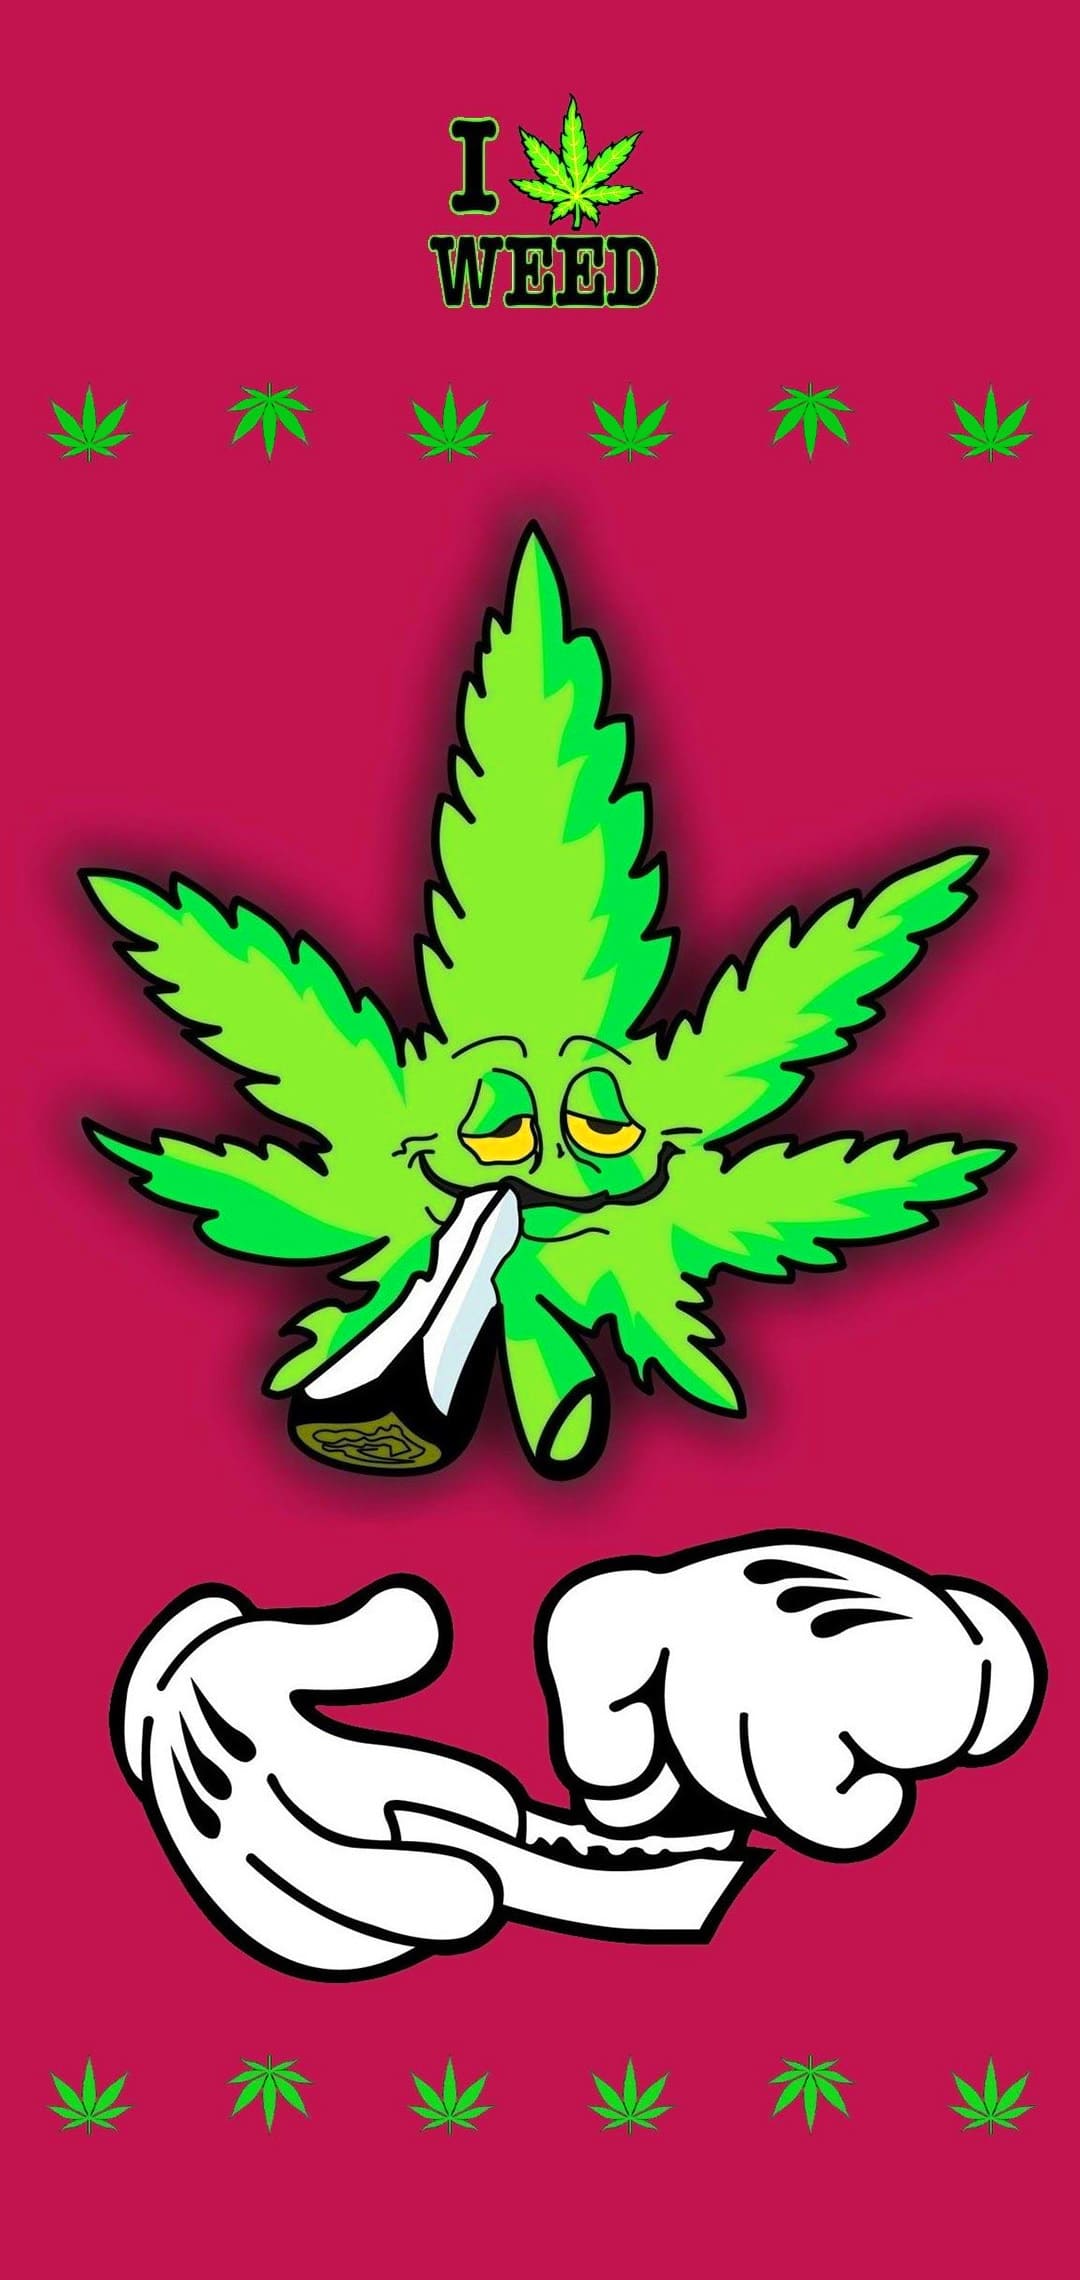 I love weed poster - Weed